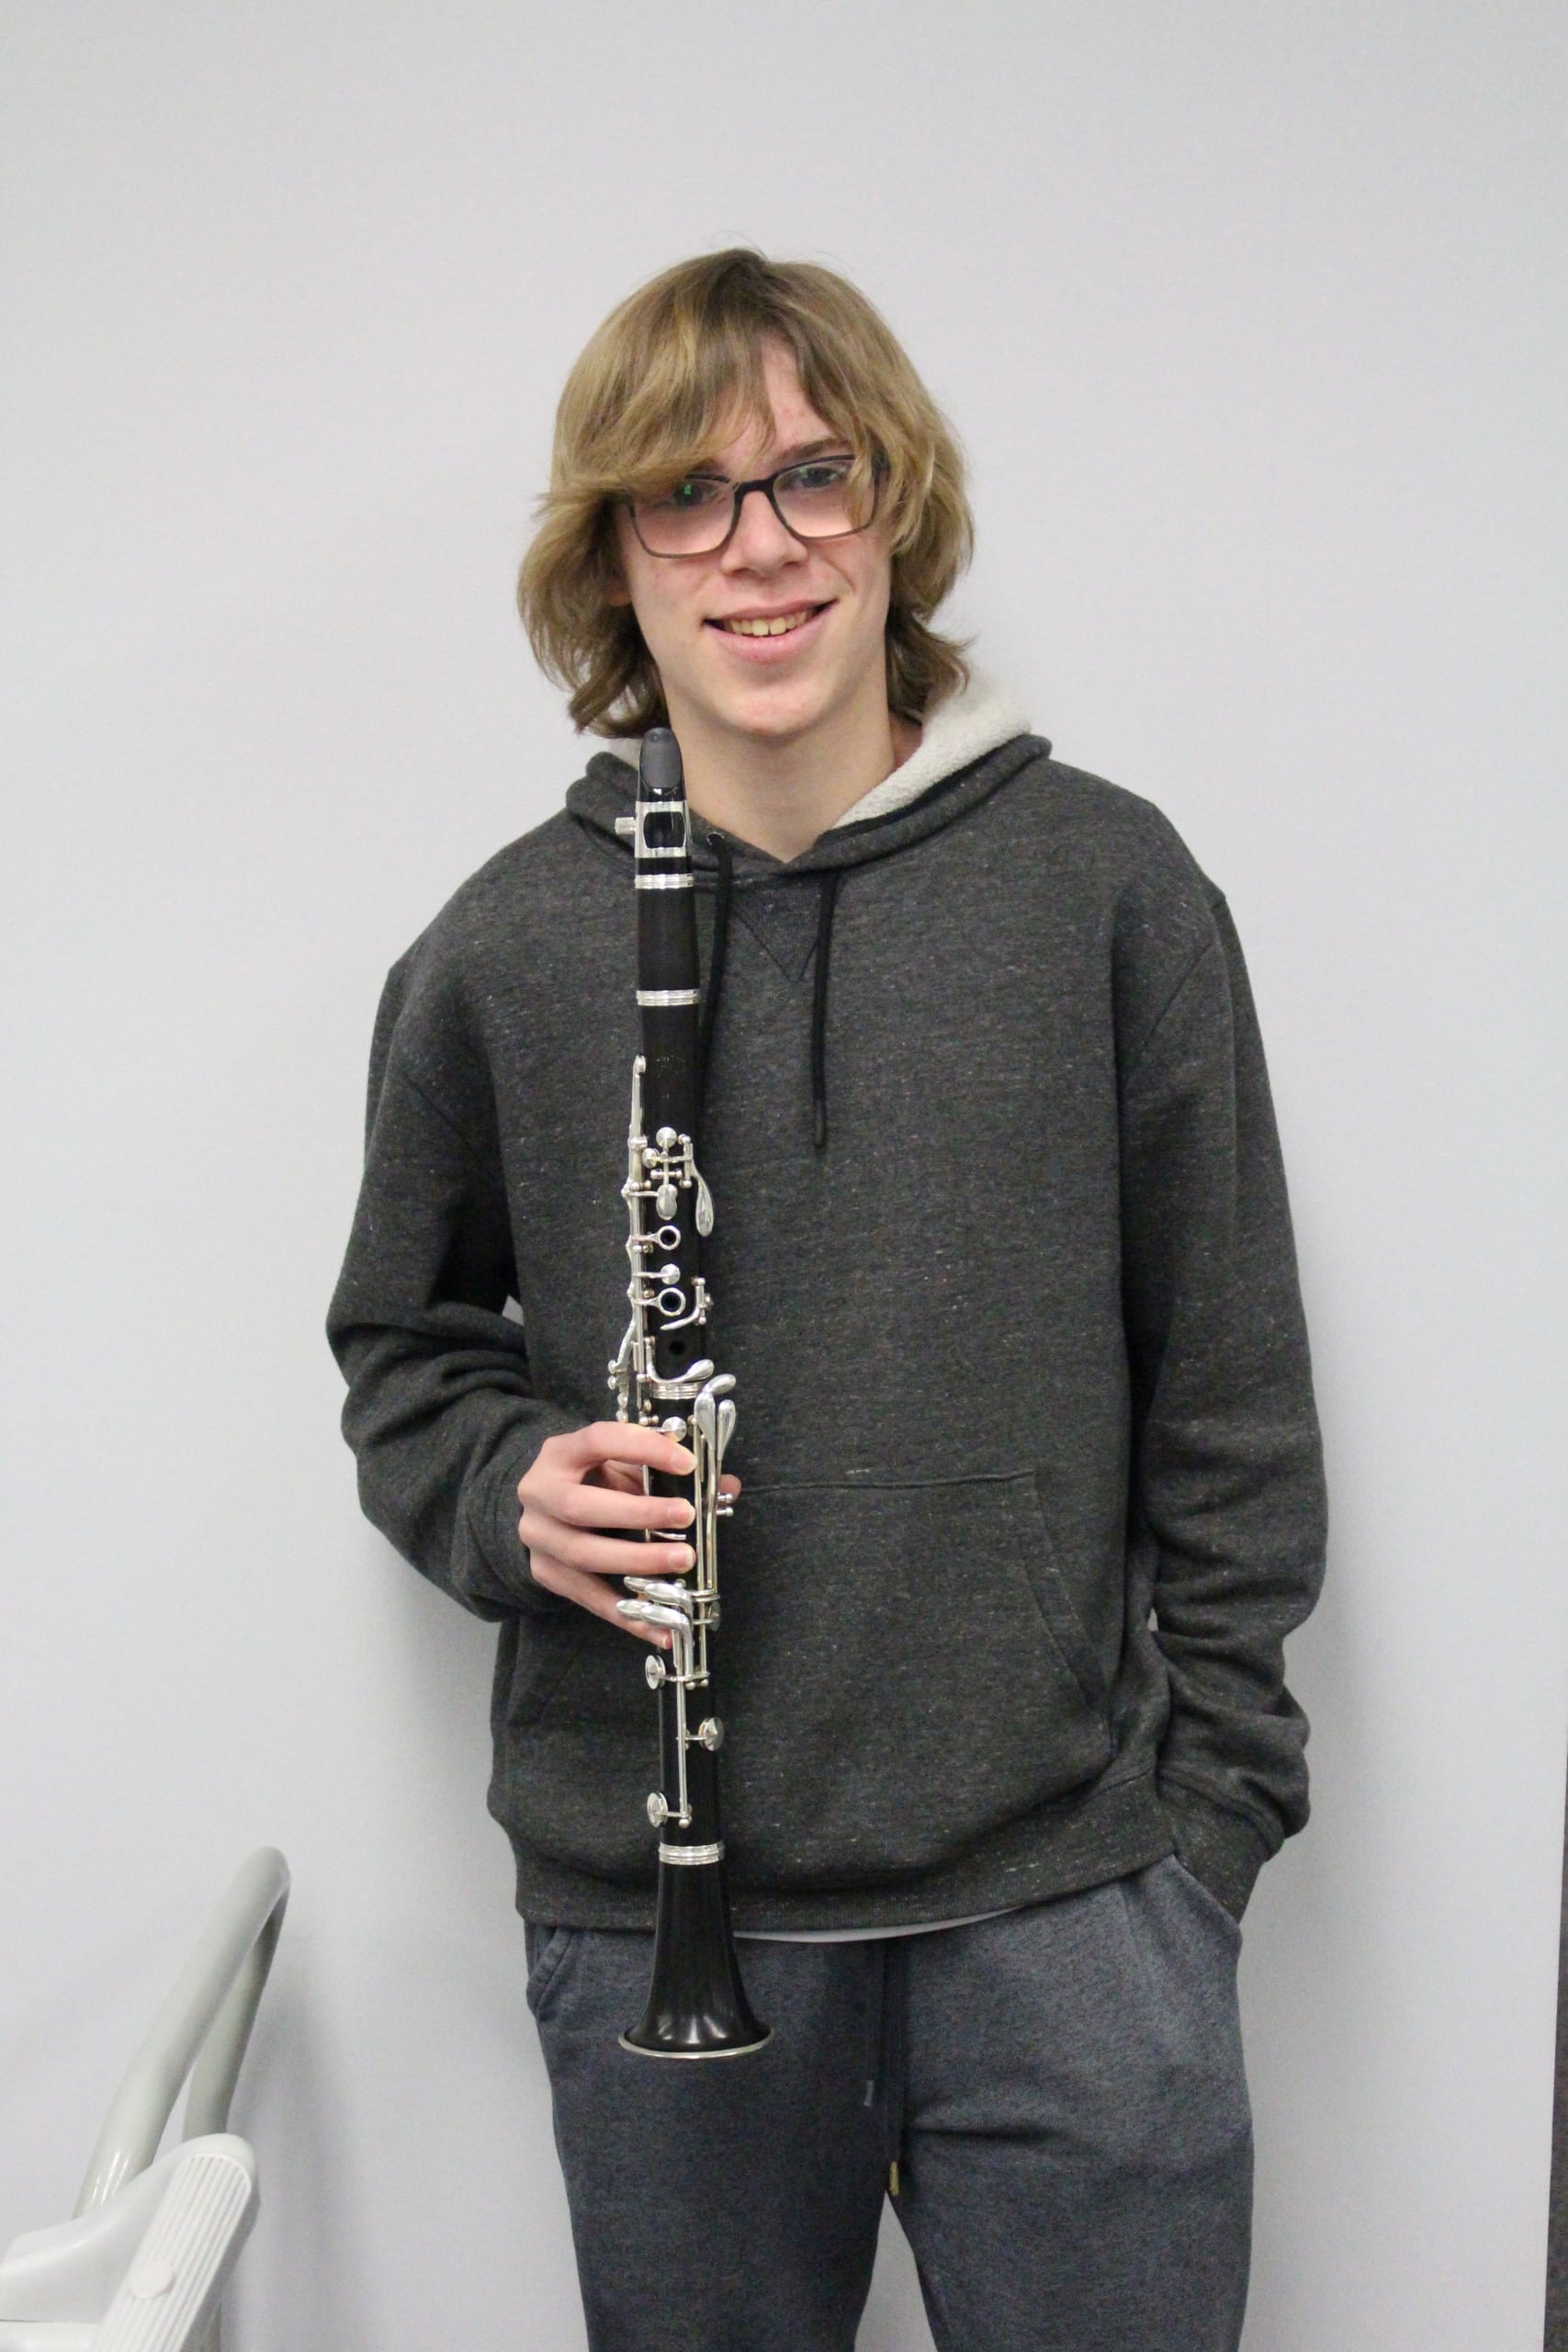 Harper Whiteman, Clark 8th grade clarinet, was recently selected as a member of the 2024 Indiana Bandmasters' Association Junior All-State Band. Only 20 clarinet students are selected from students state-wide in grades 7-9. This is Harper's second year qualifying for the band. Congratulations!